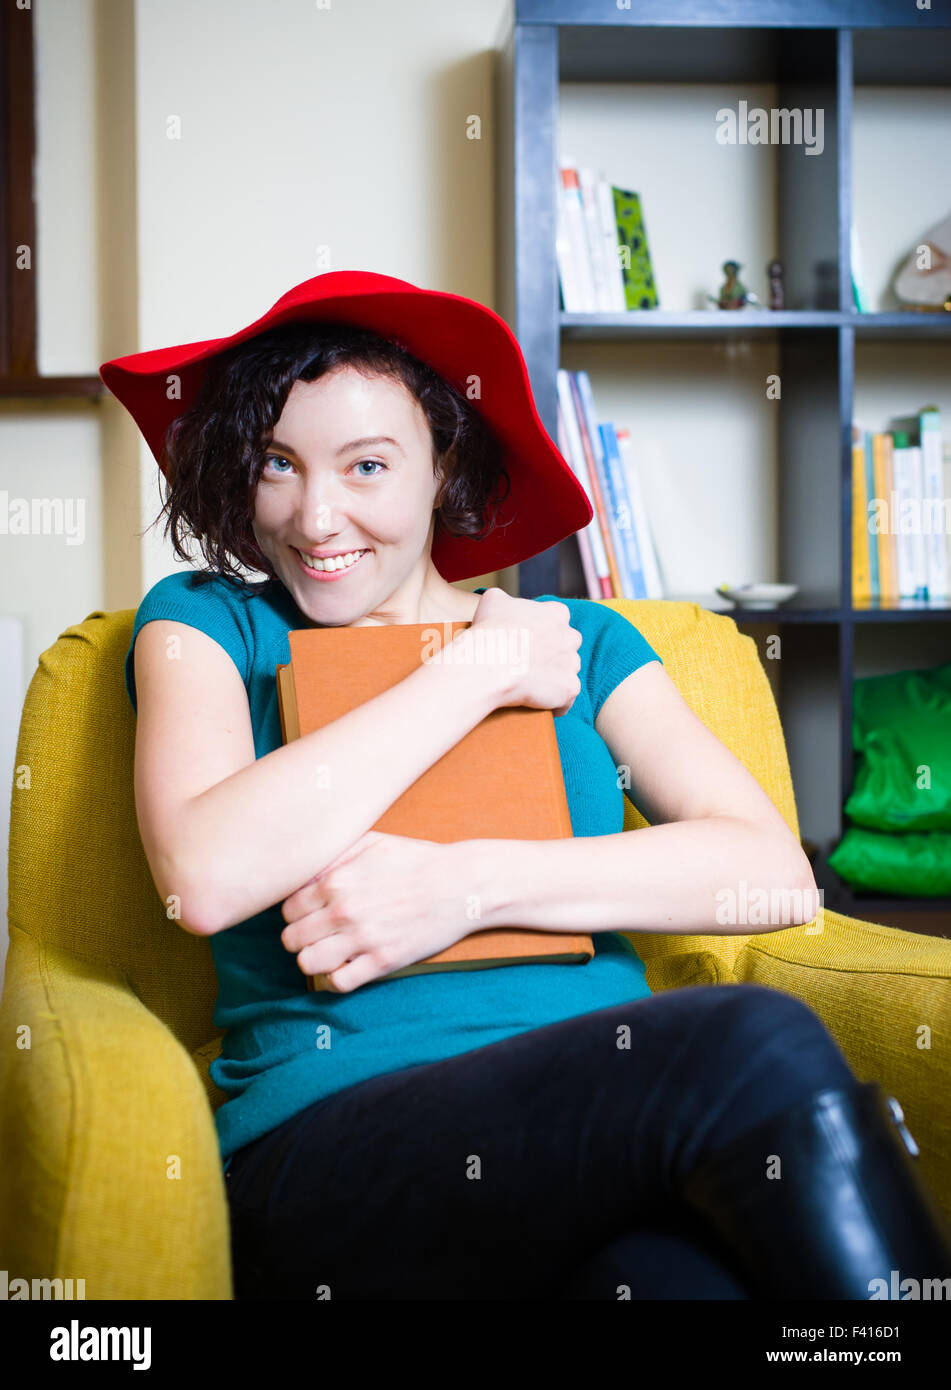 Young woman with red hat smiling with a book with brown cover Stock Photo